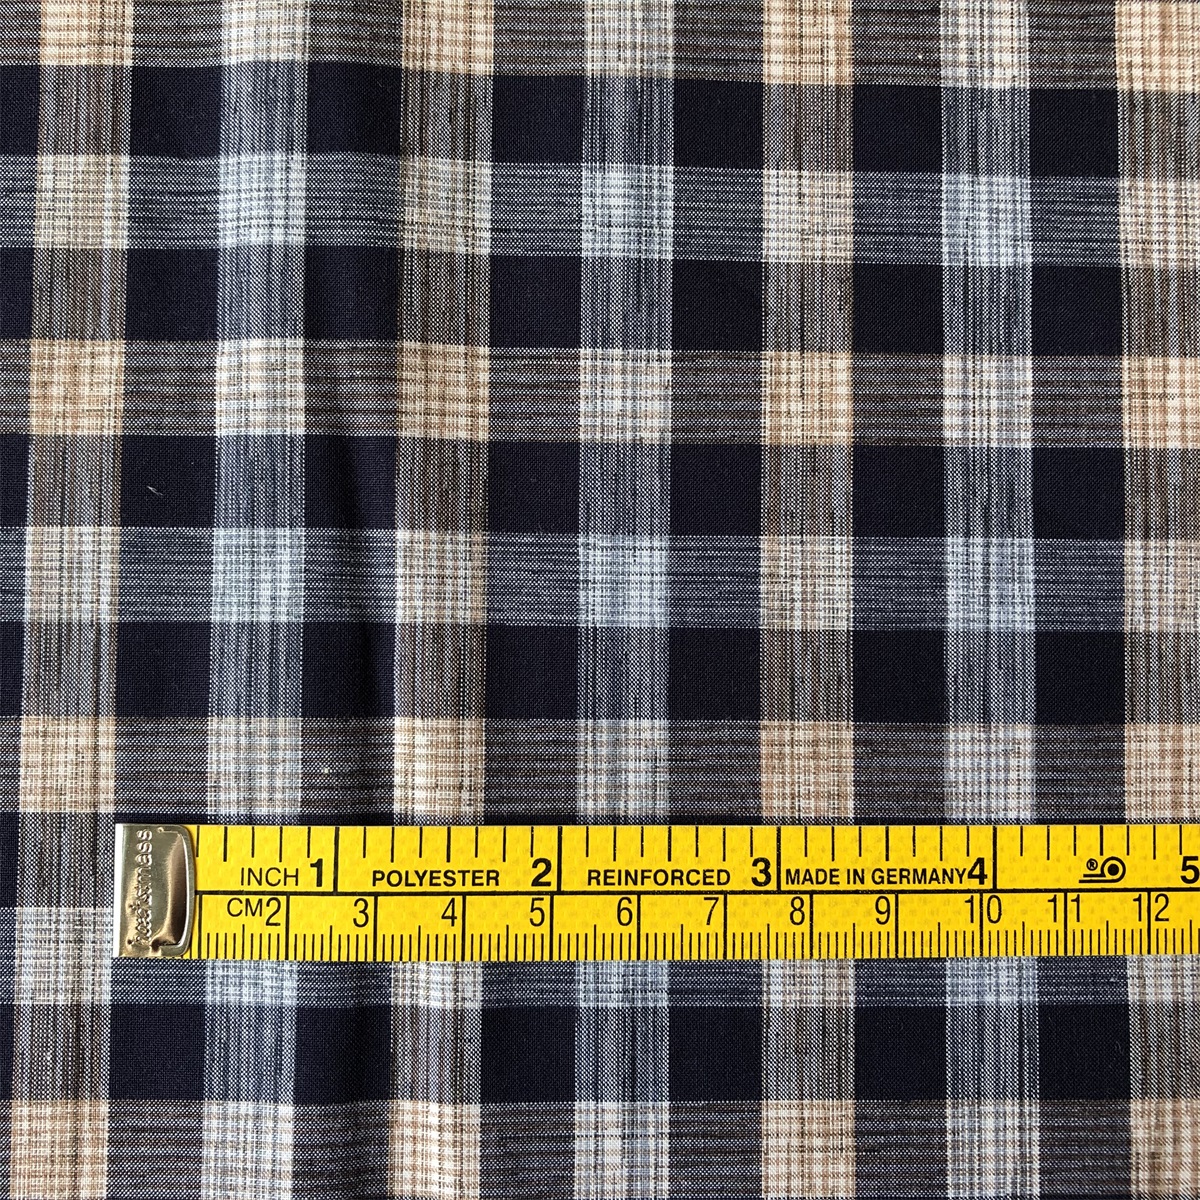 Yarn Dyed Fabric by space dyed yarn 100% cotton yarn dyed poplin plain check shirts woven fabric for men's casual shirts